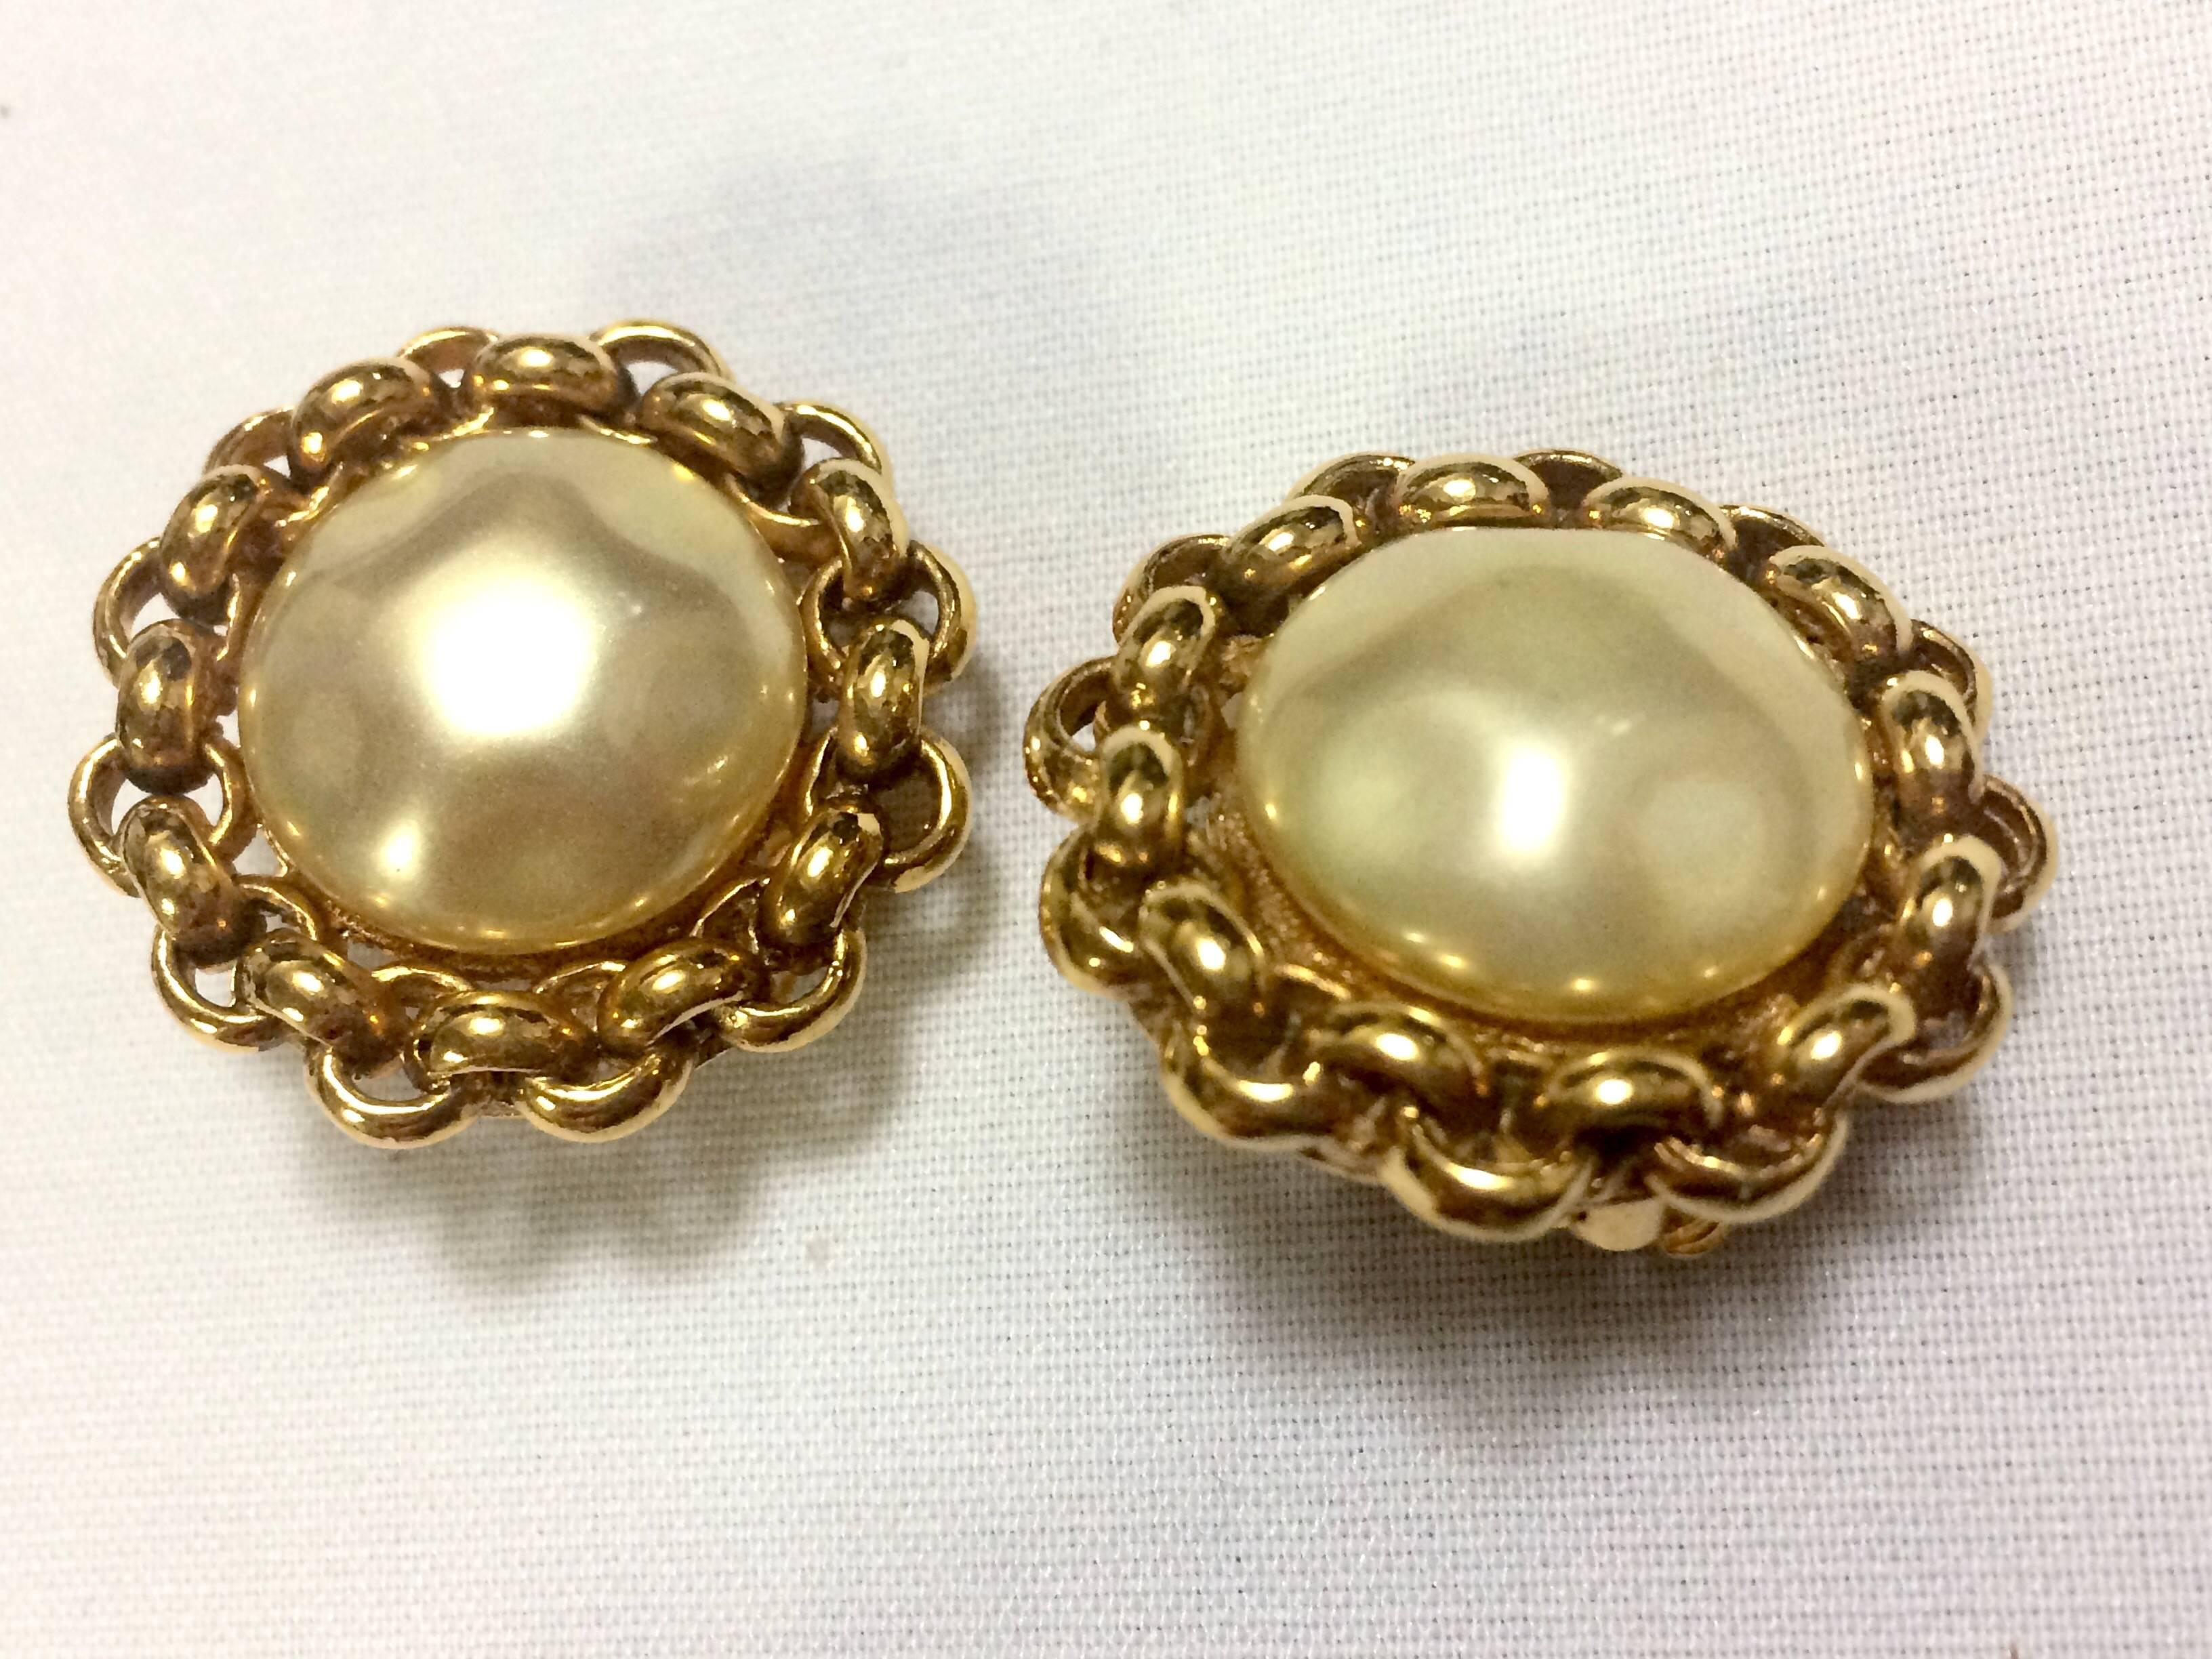 Women's Vintage CHANEL classic simple earrings with large faux pearl and chain frames